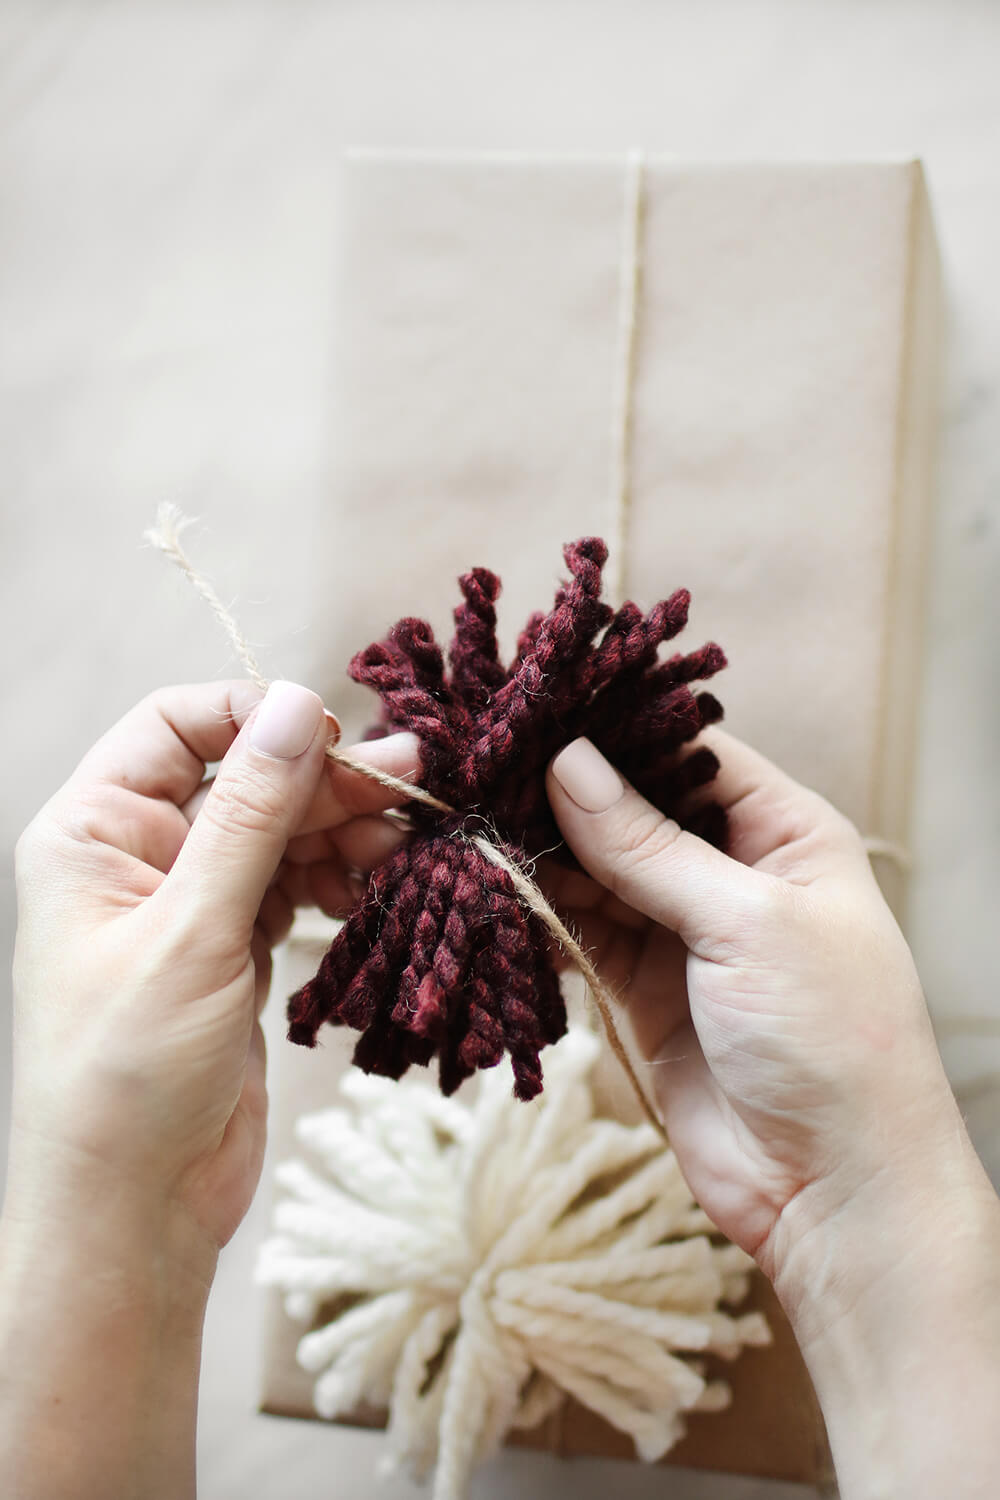 I am sharing how to DIY yarn pom poms to dress up your gift giving! I love the added texture and the layer it brings and they are super simple to create. Catch it over on KaraLayne.com!